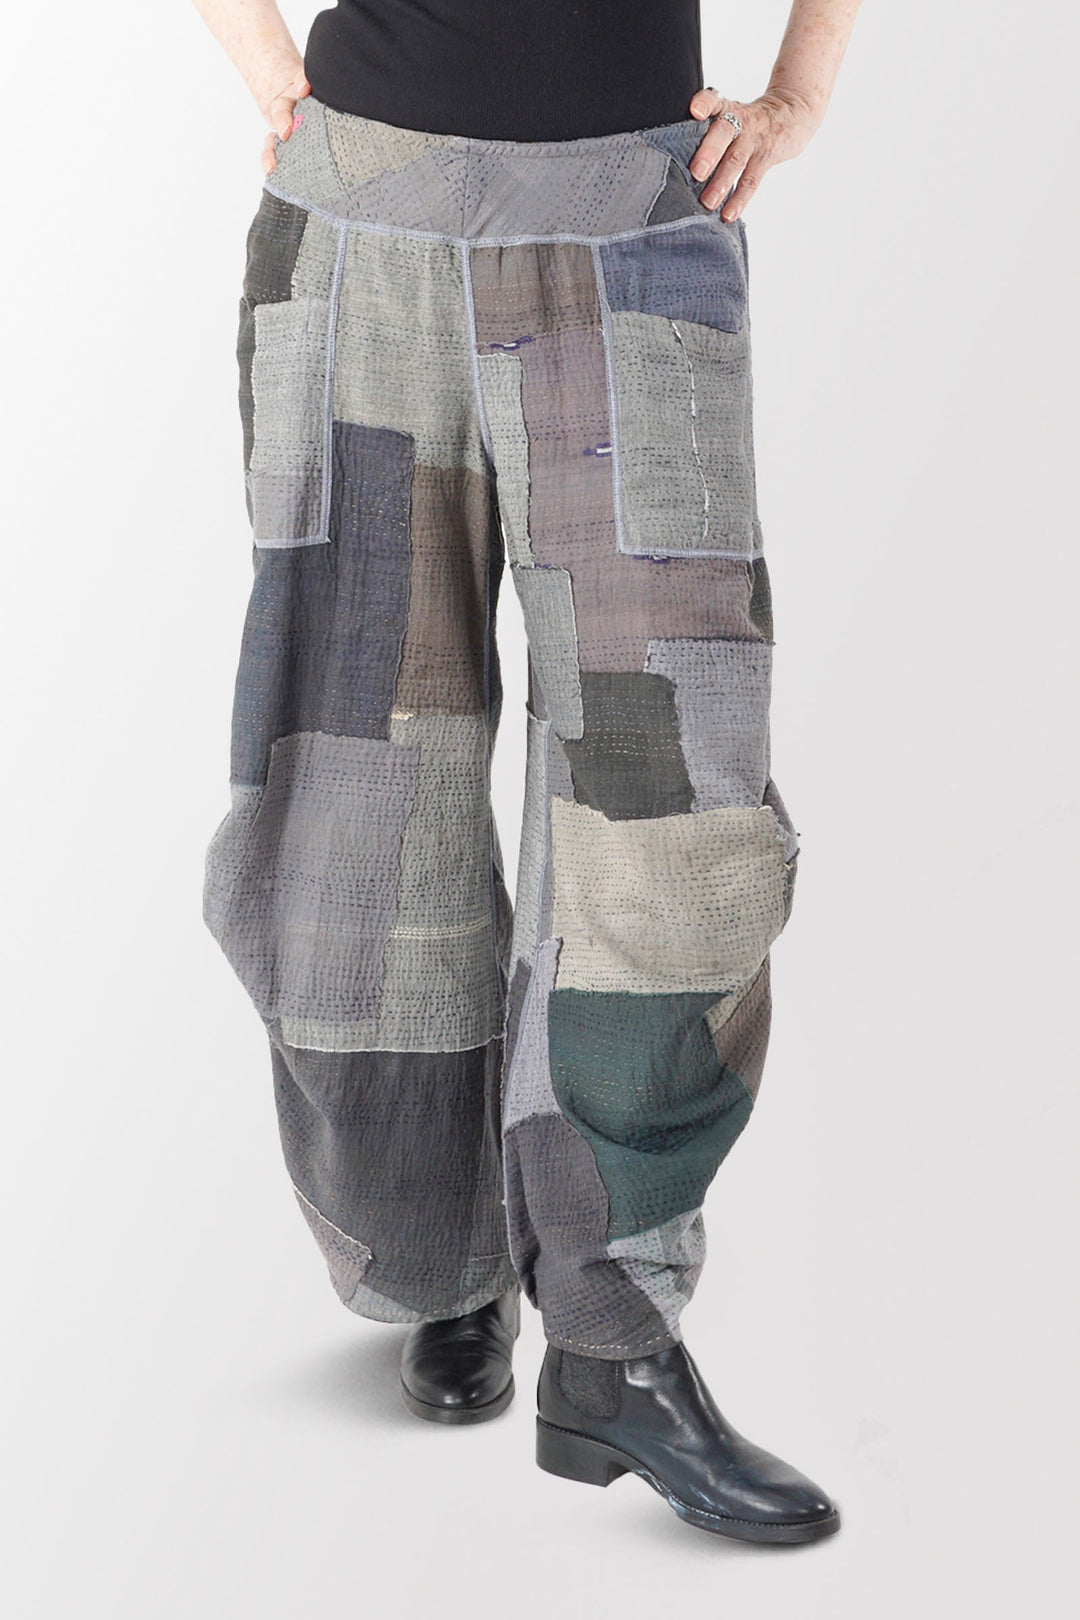 WOVEN STRIPE FRAYED PATCH BACK KANTHA KNEE TUCKED PANTS - wp2625-gry -